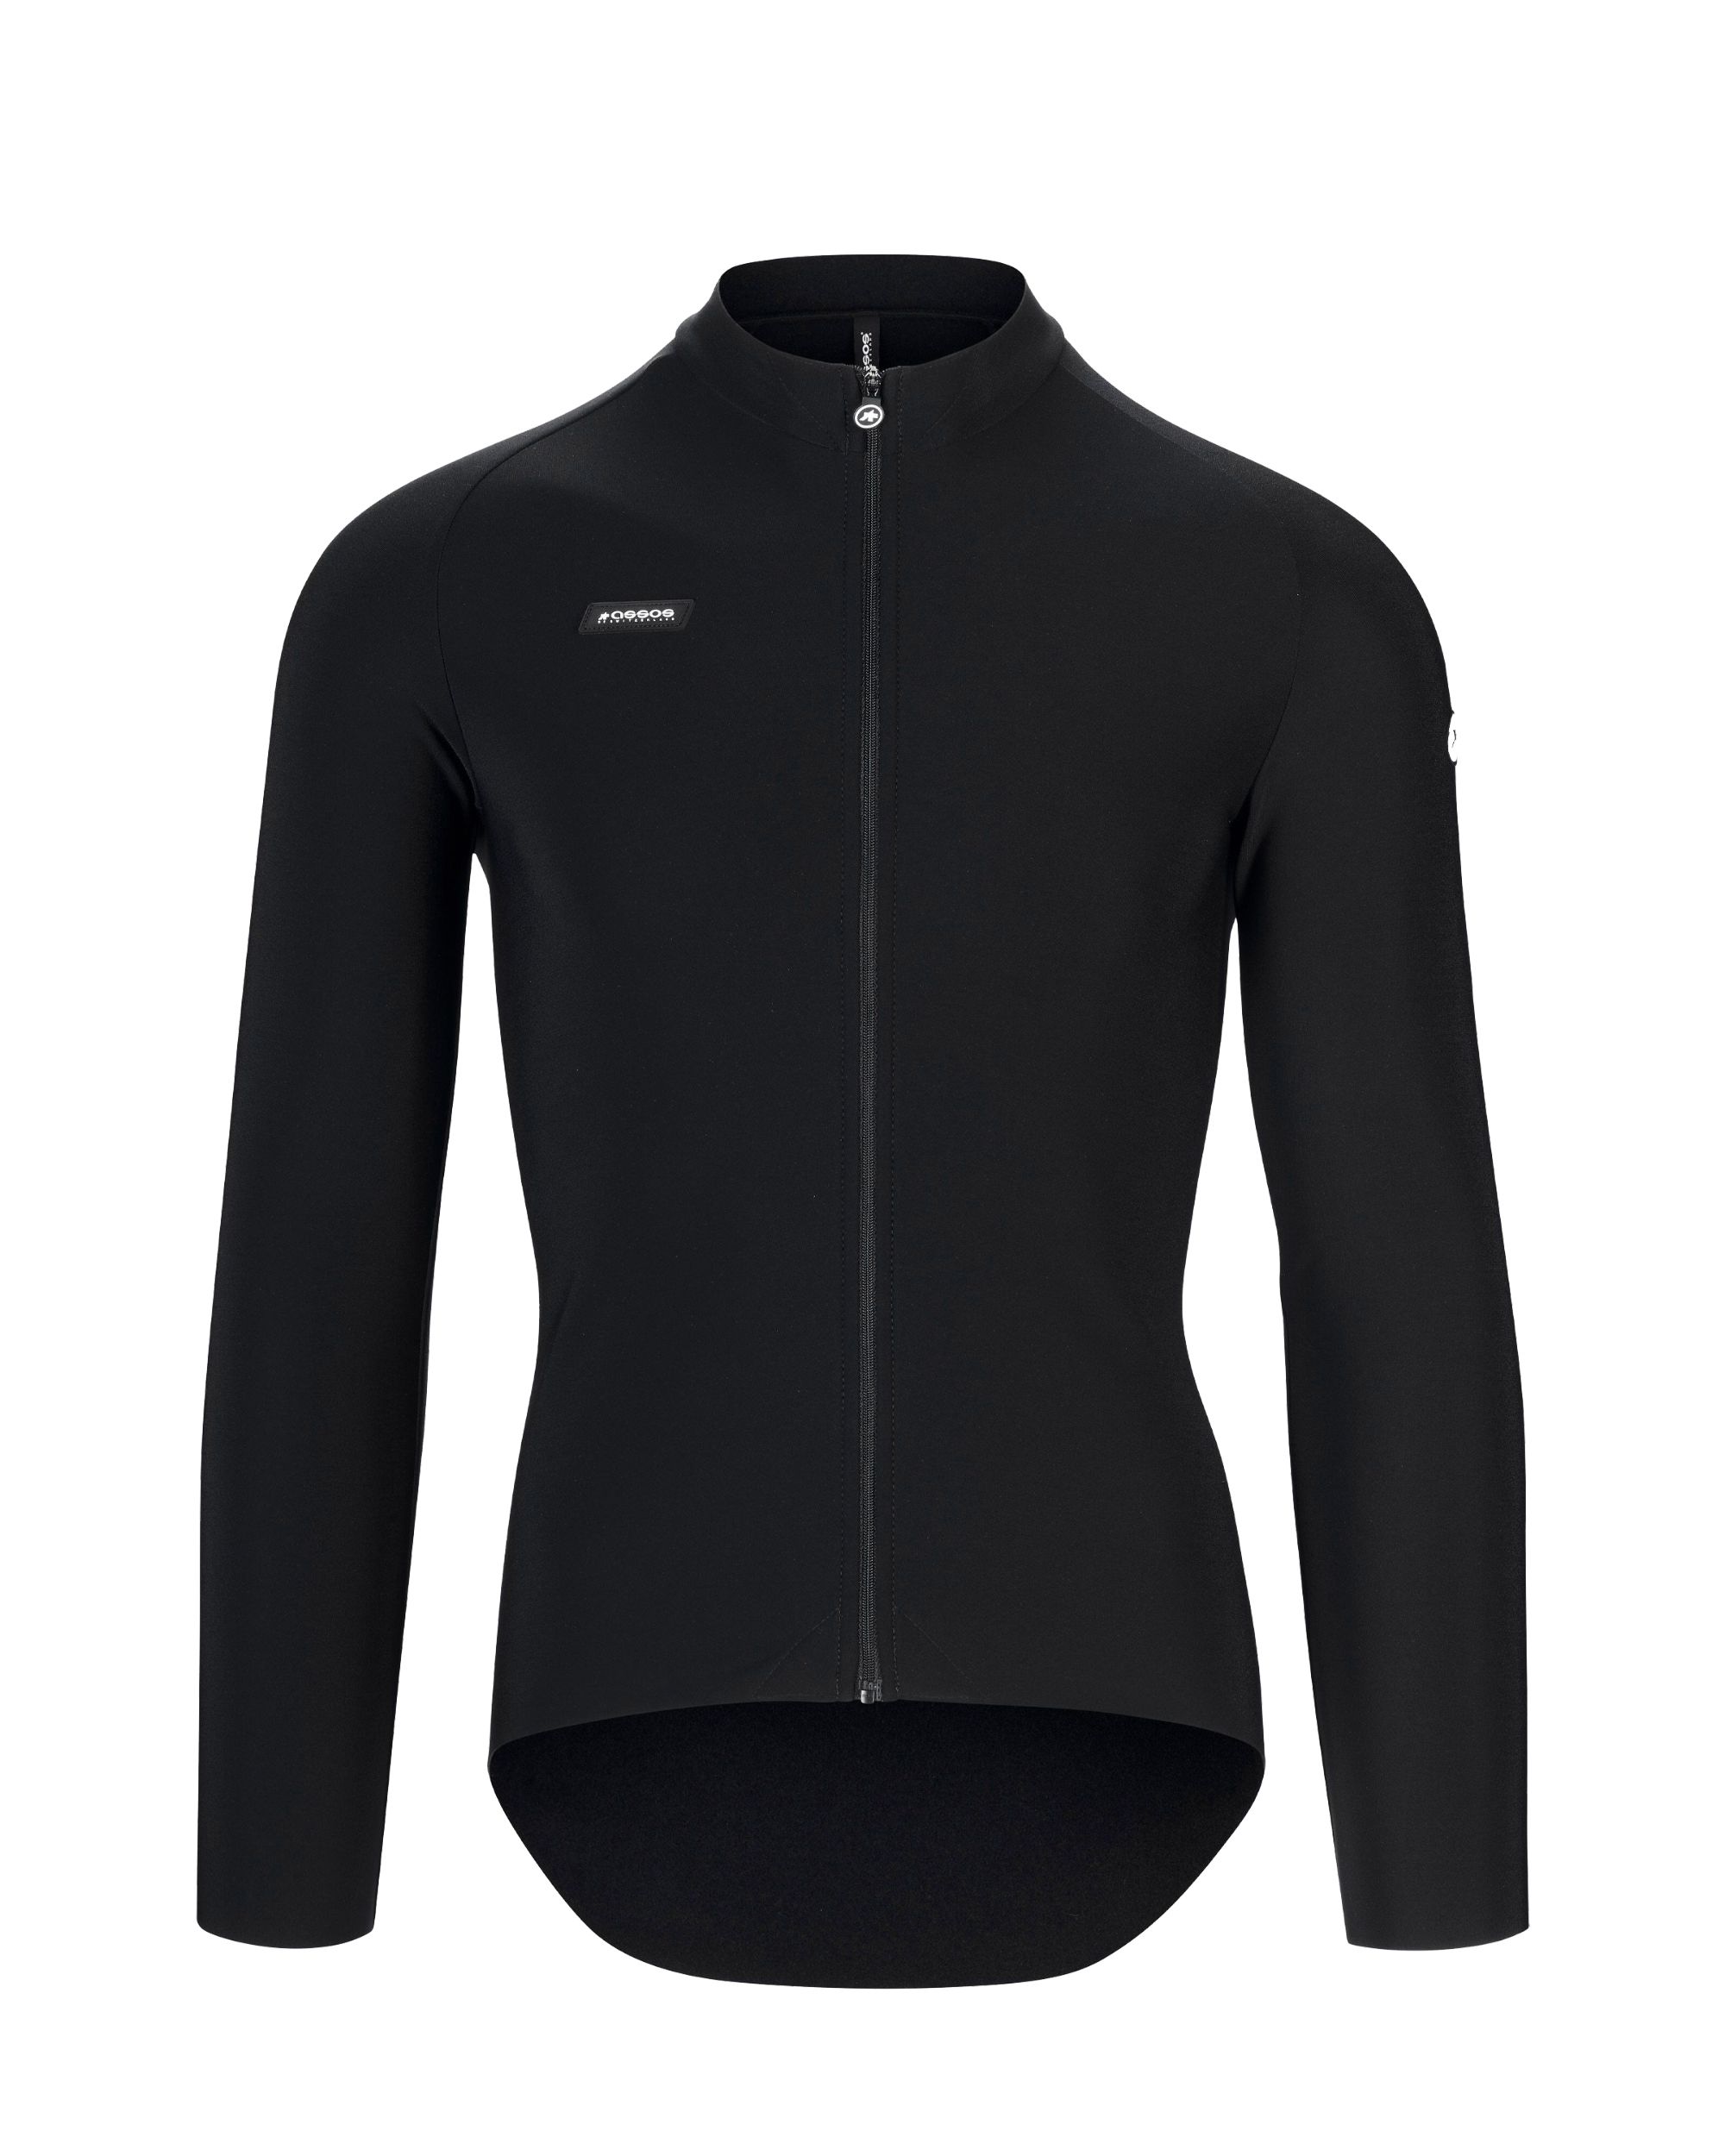 Assos GT LS Mid Layer - £125 | Jerseys - Long Sleeve Close Fit | Cyclestore